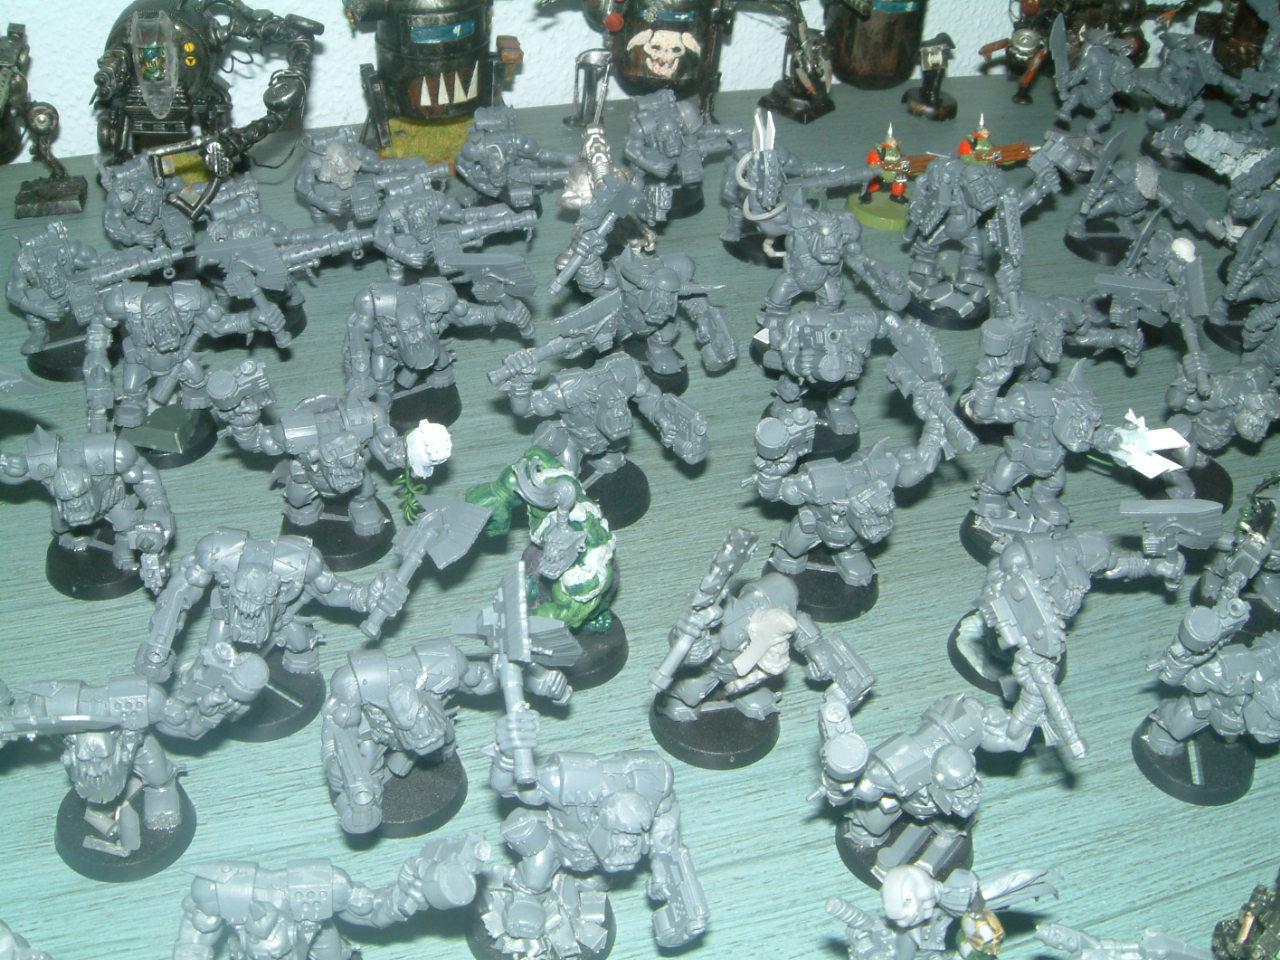 Army, Bearers, Black, Cans, Chaos, Command, Dreadnought, Legion, Mob, Nurgle, Orcs, Scratch Build, Soldier, Space, Space Marines, Waaagh, Word